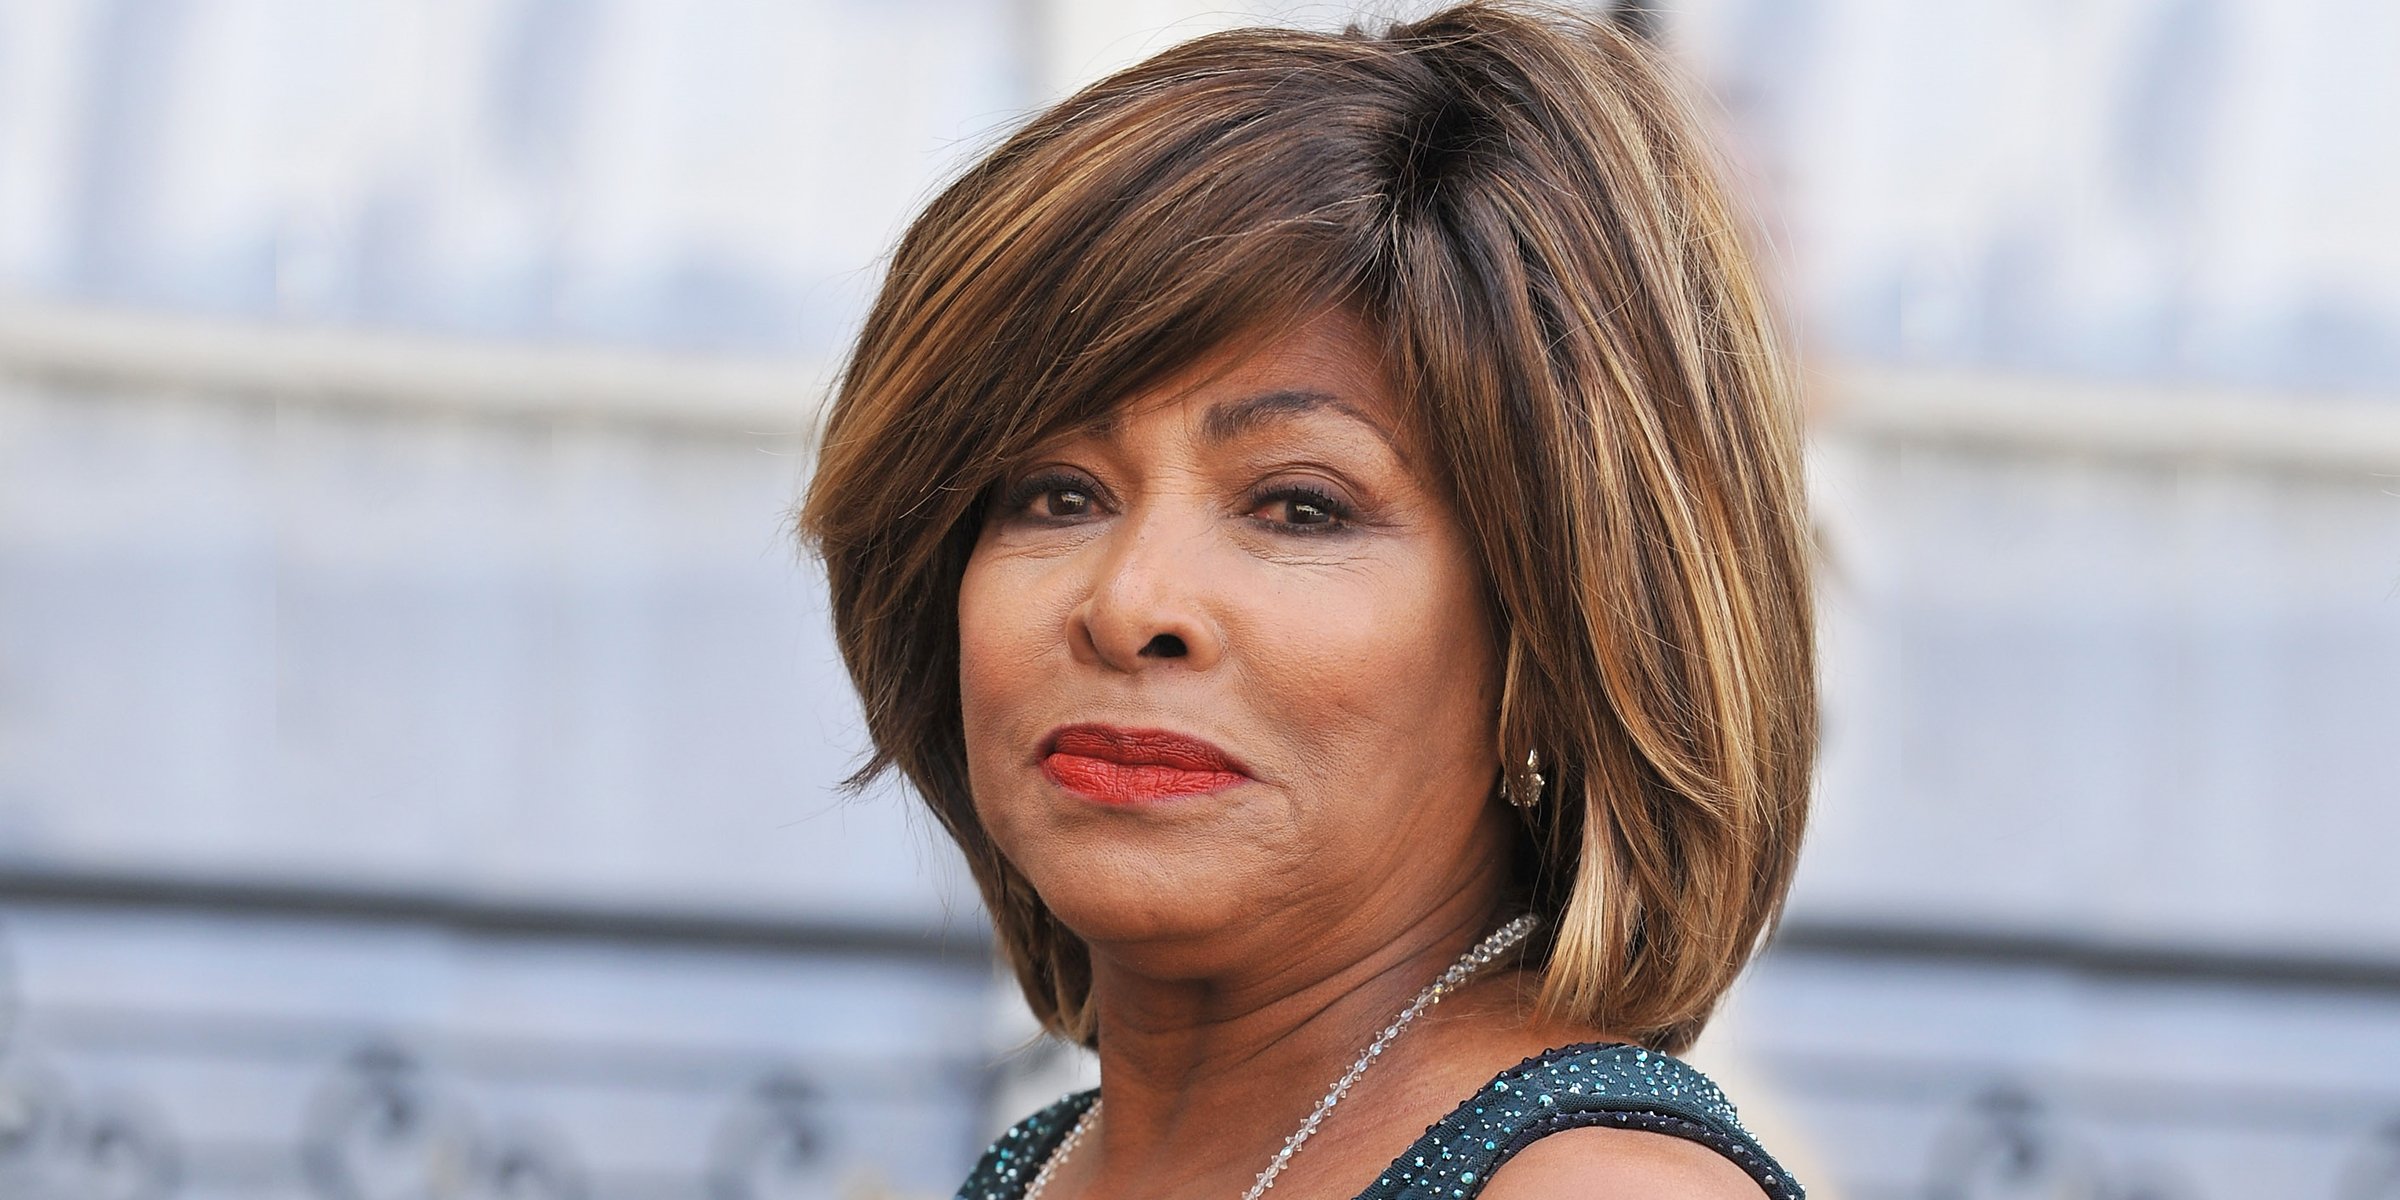 Tina Turner┃Source: Getty Images